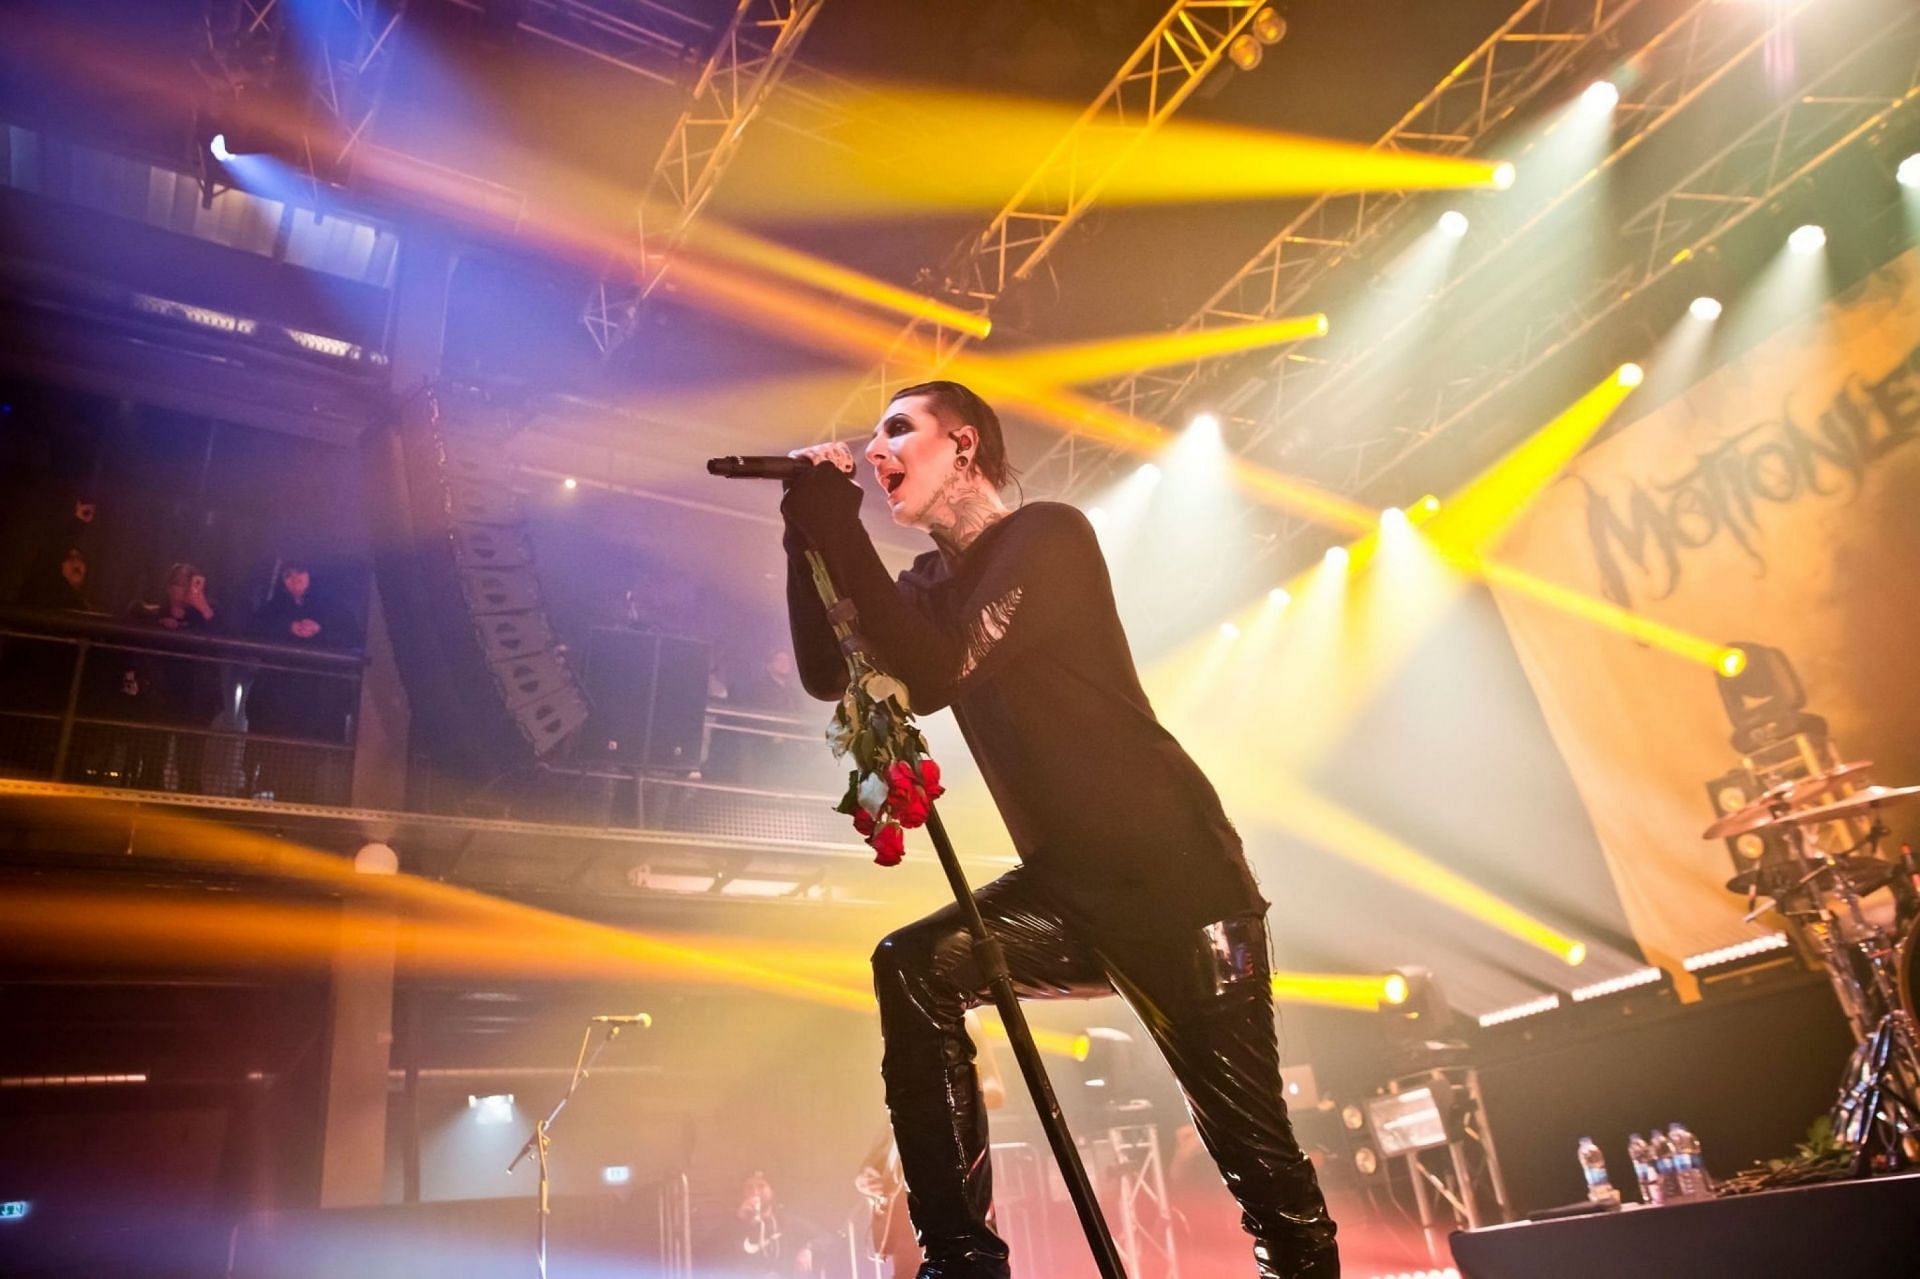 Motionless in White, one of the bands behind the Dark Horizon tour, perform at at the Kesselhaus on November 27, 2019 in Berlin, Germany. (Image via Getty Images)